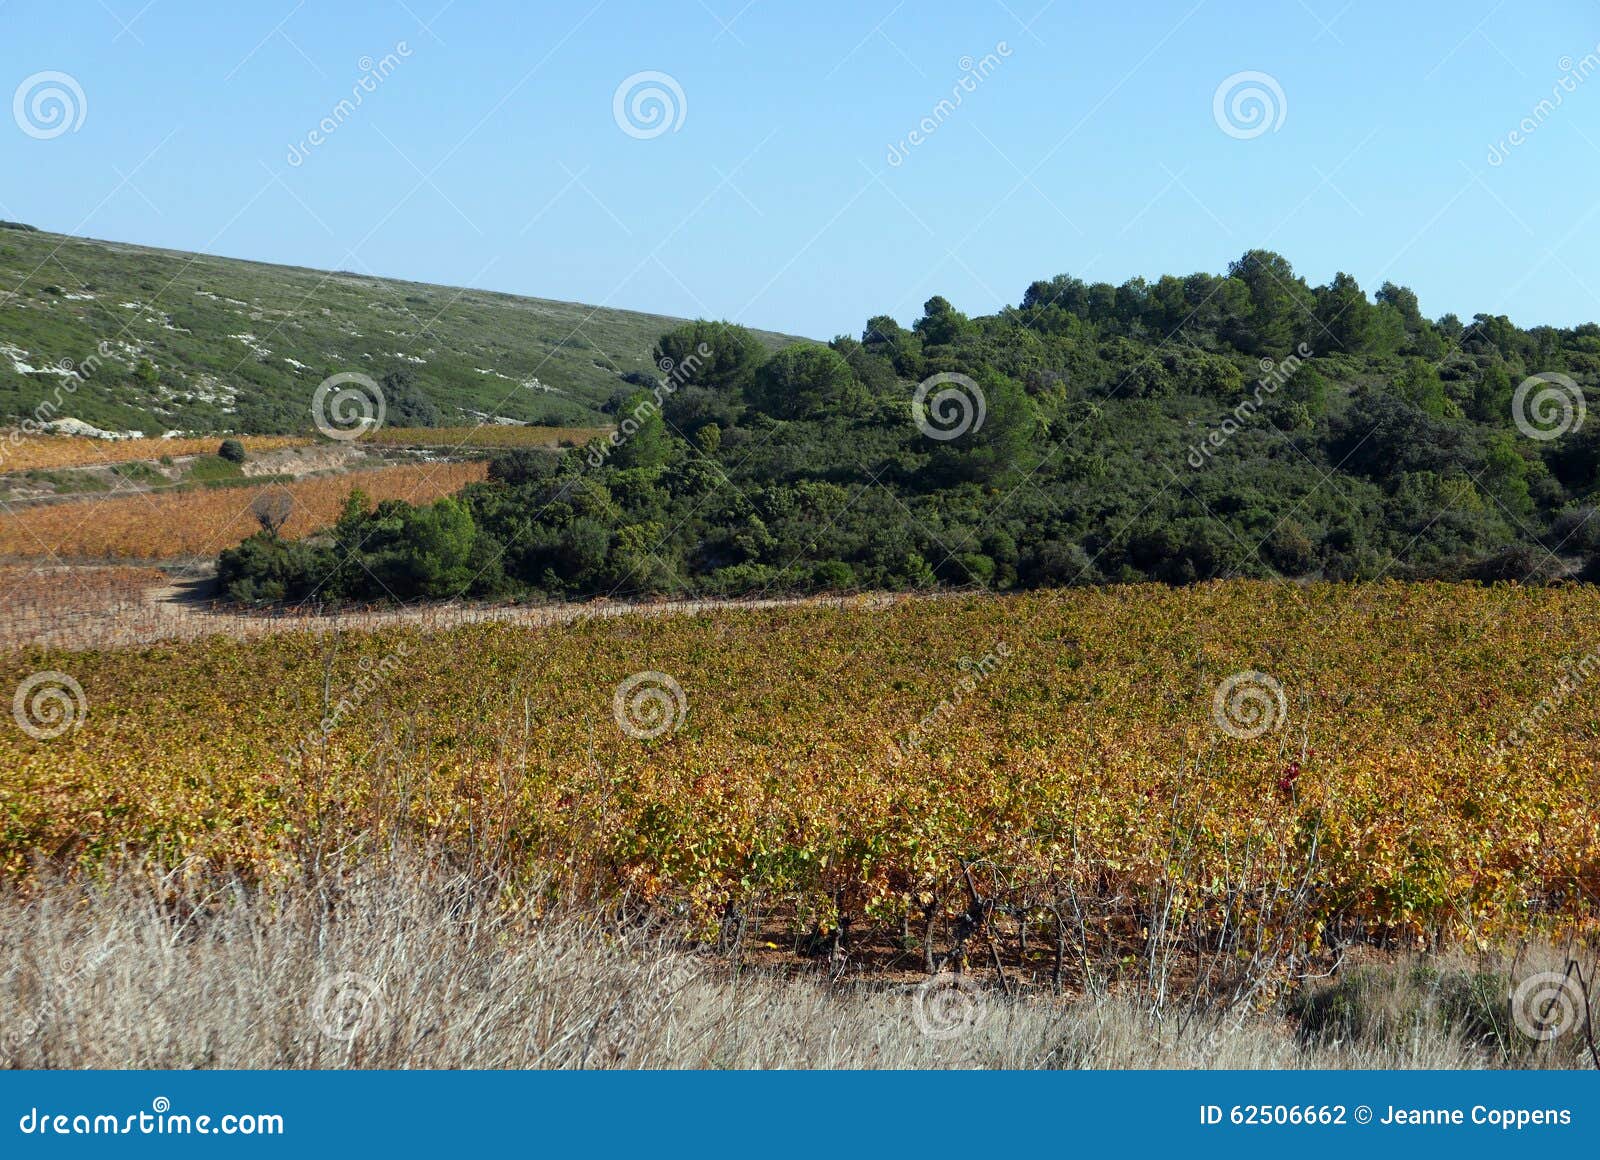 Languedoc Vineyards in Autumn. Stock Photo - Image of pine, mountain ...